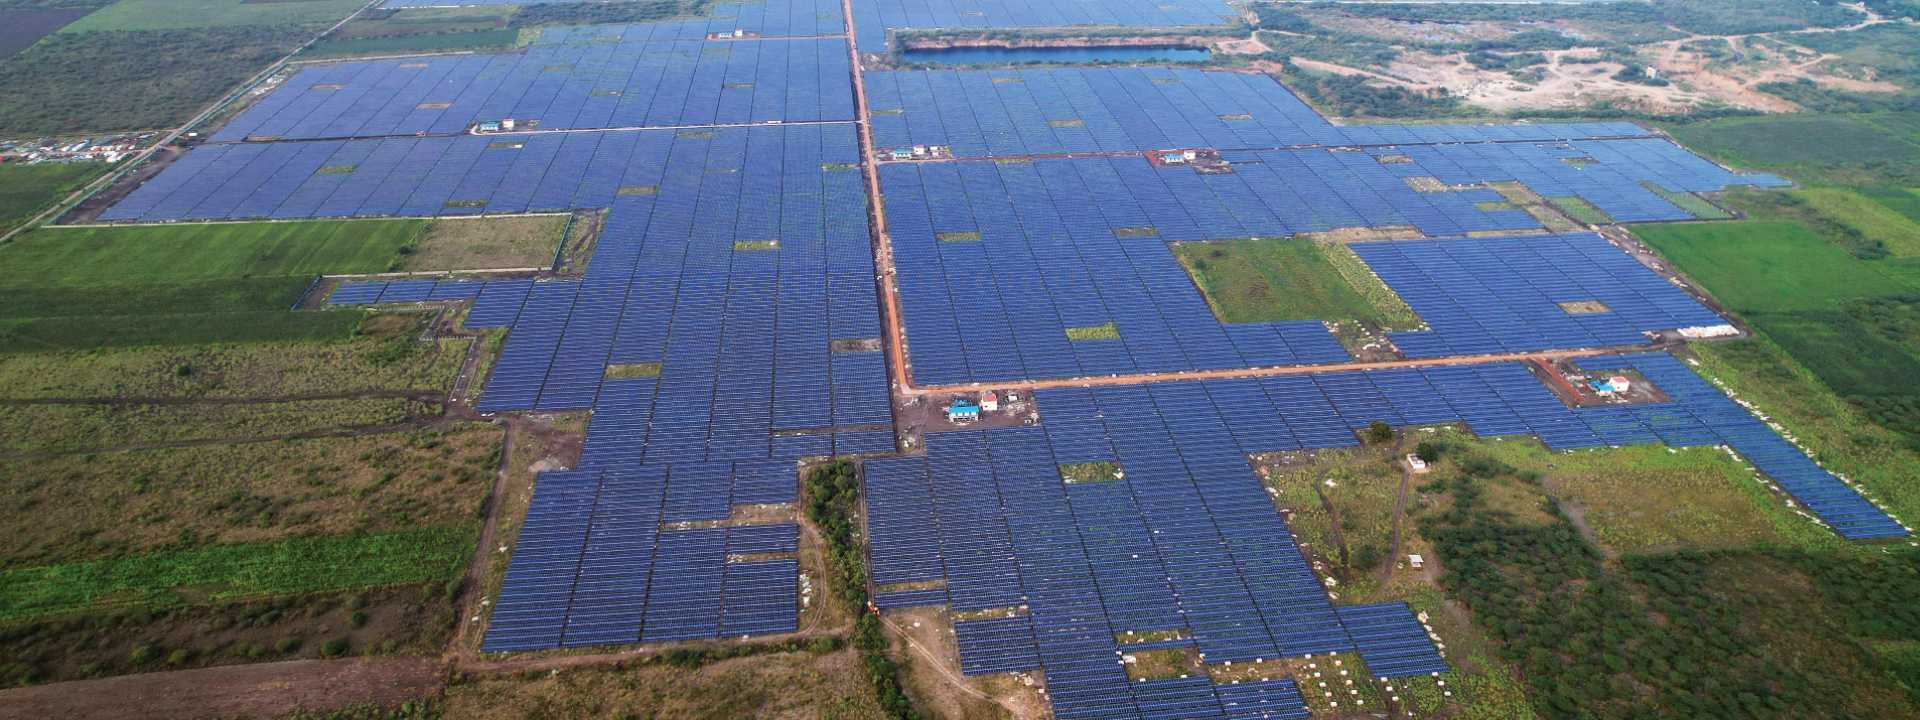 Roof Top Solar plant in Amritsar- L&T Construction